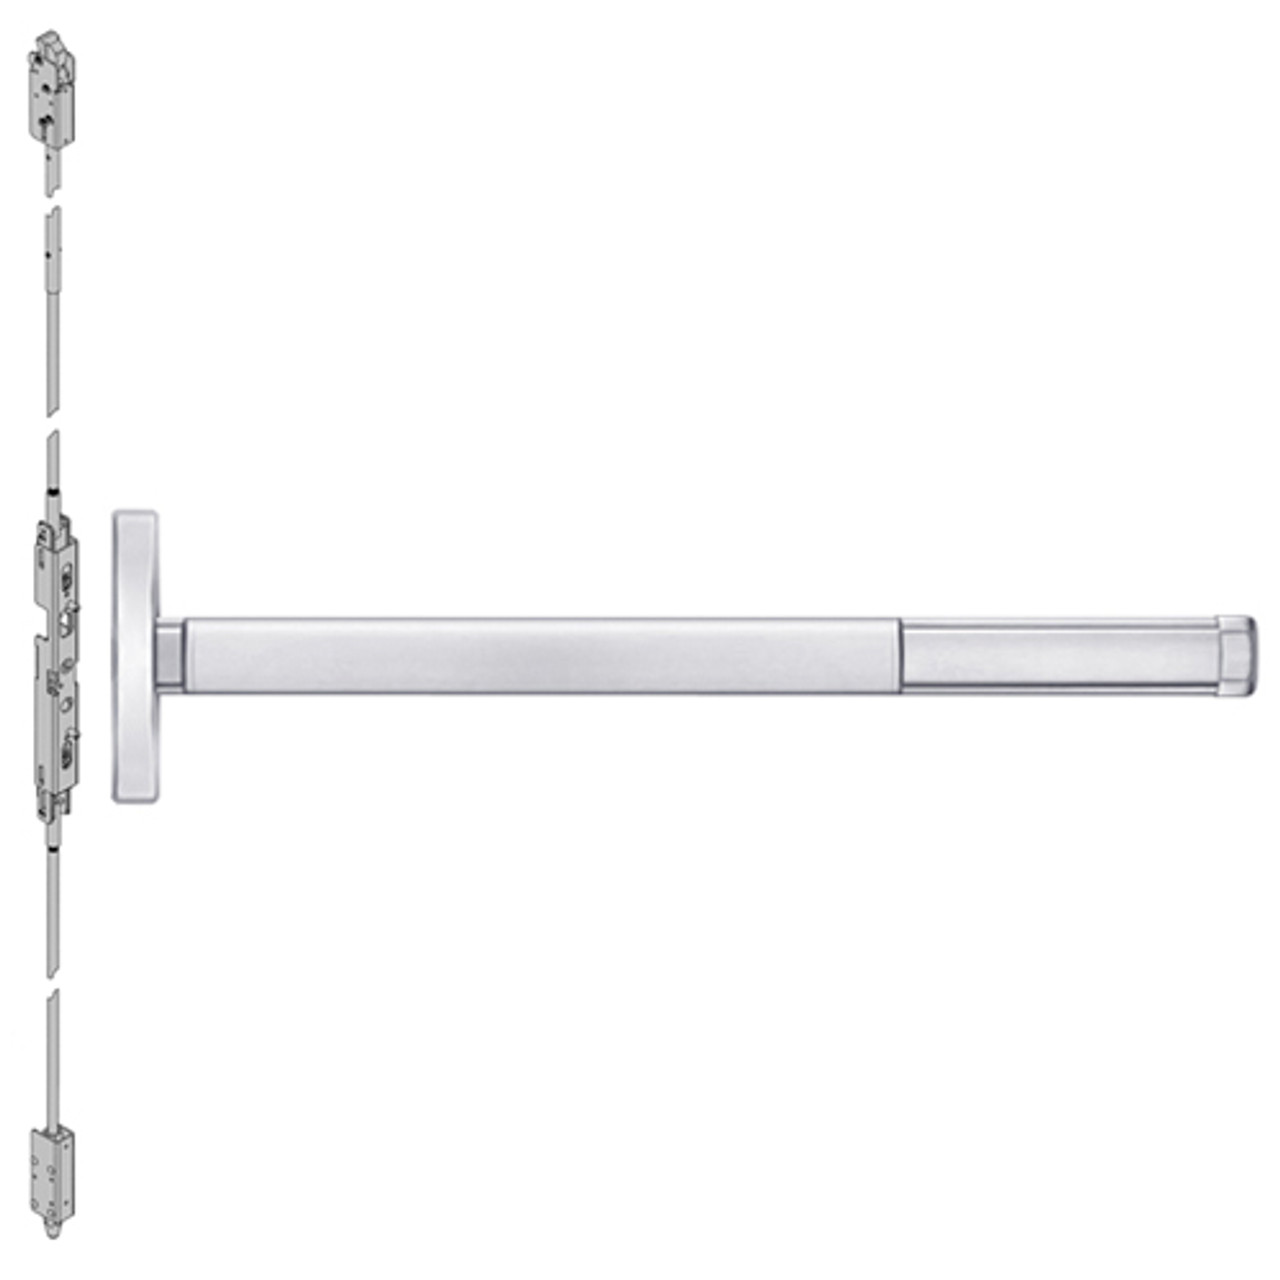 FL2602-625-48 PHI 2600 Series Fire Rated Concealed Vertical Rod Exit Device Prepped for Dummy Trim in Bright Chrome Finish